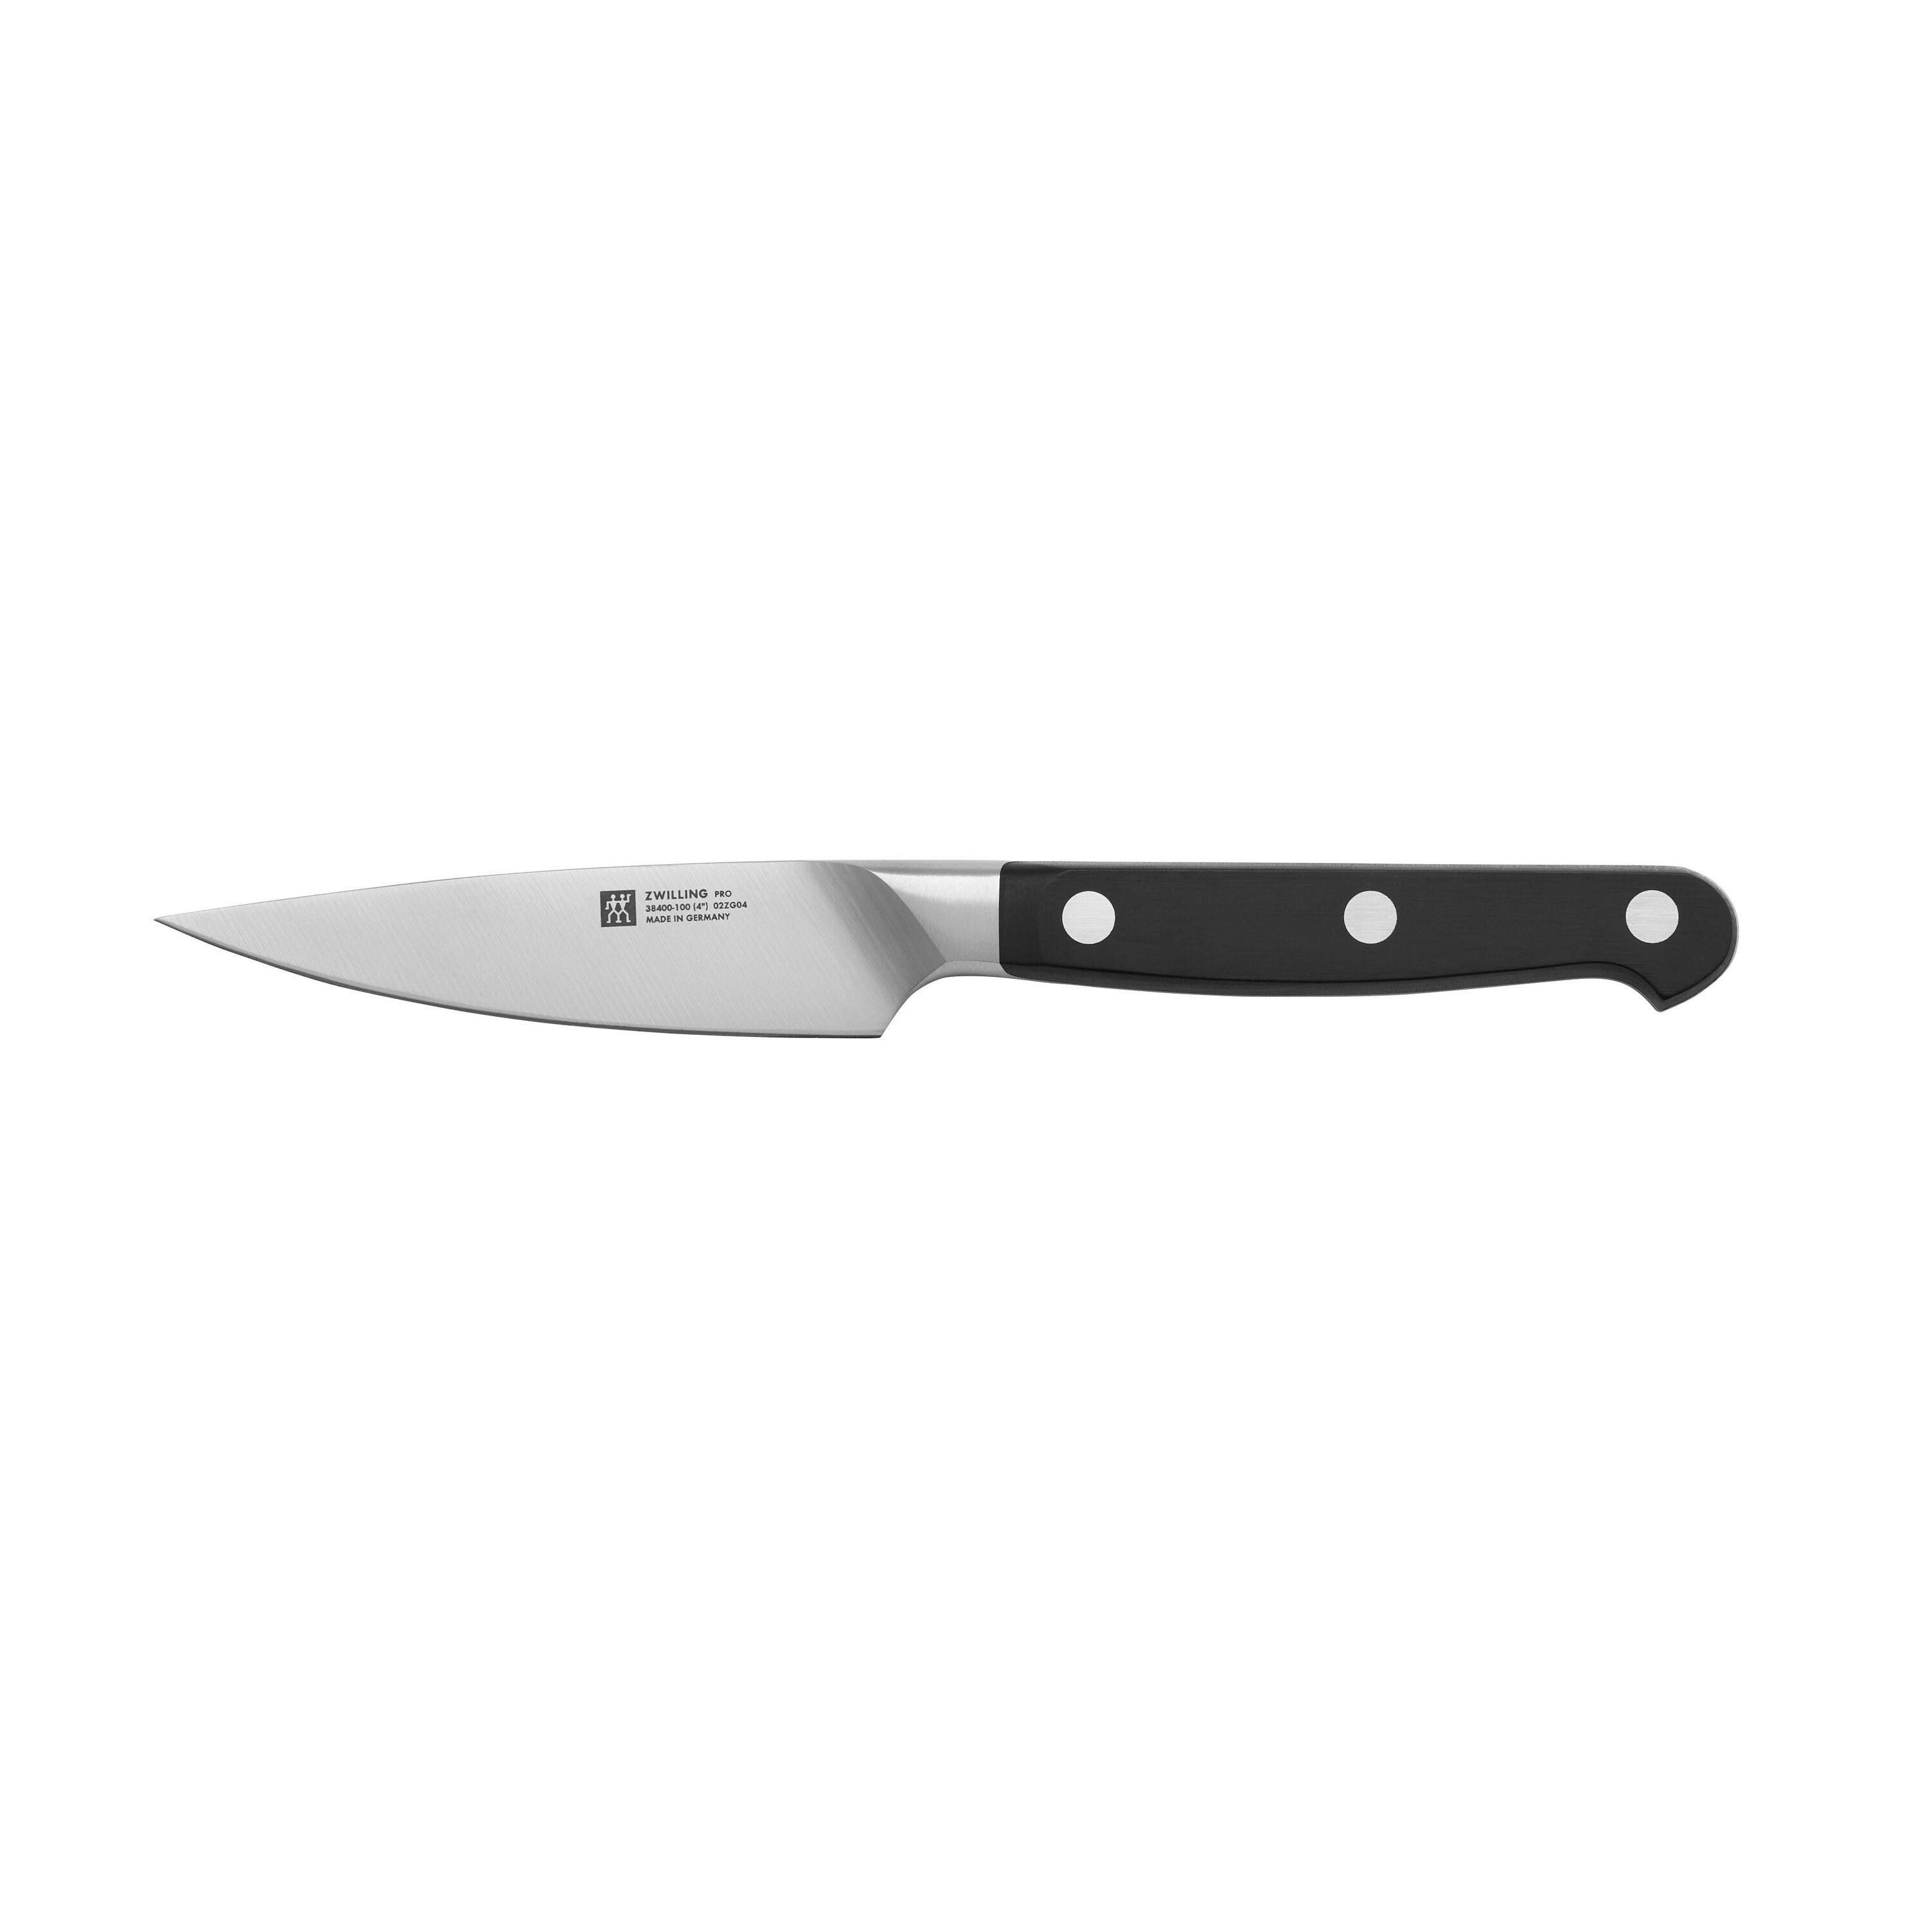 Zwilling J. A. Henckels - PRO 4 Inch Paring Knife